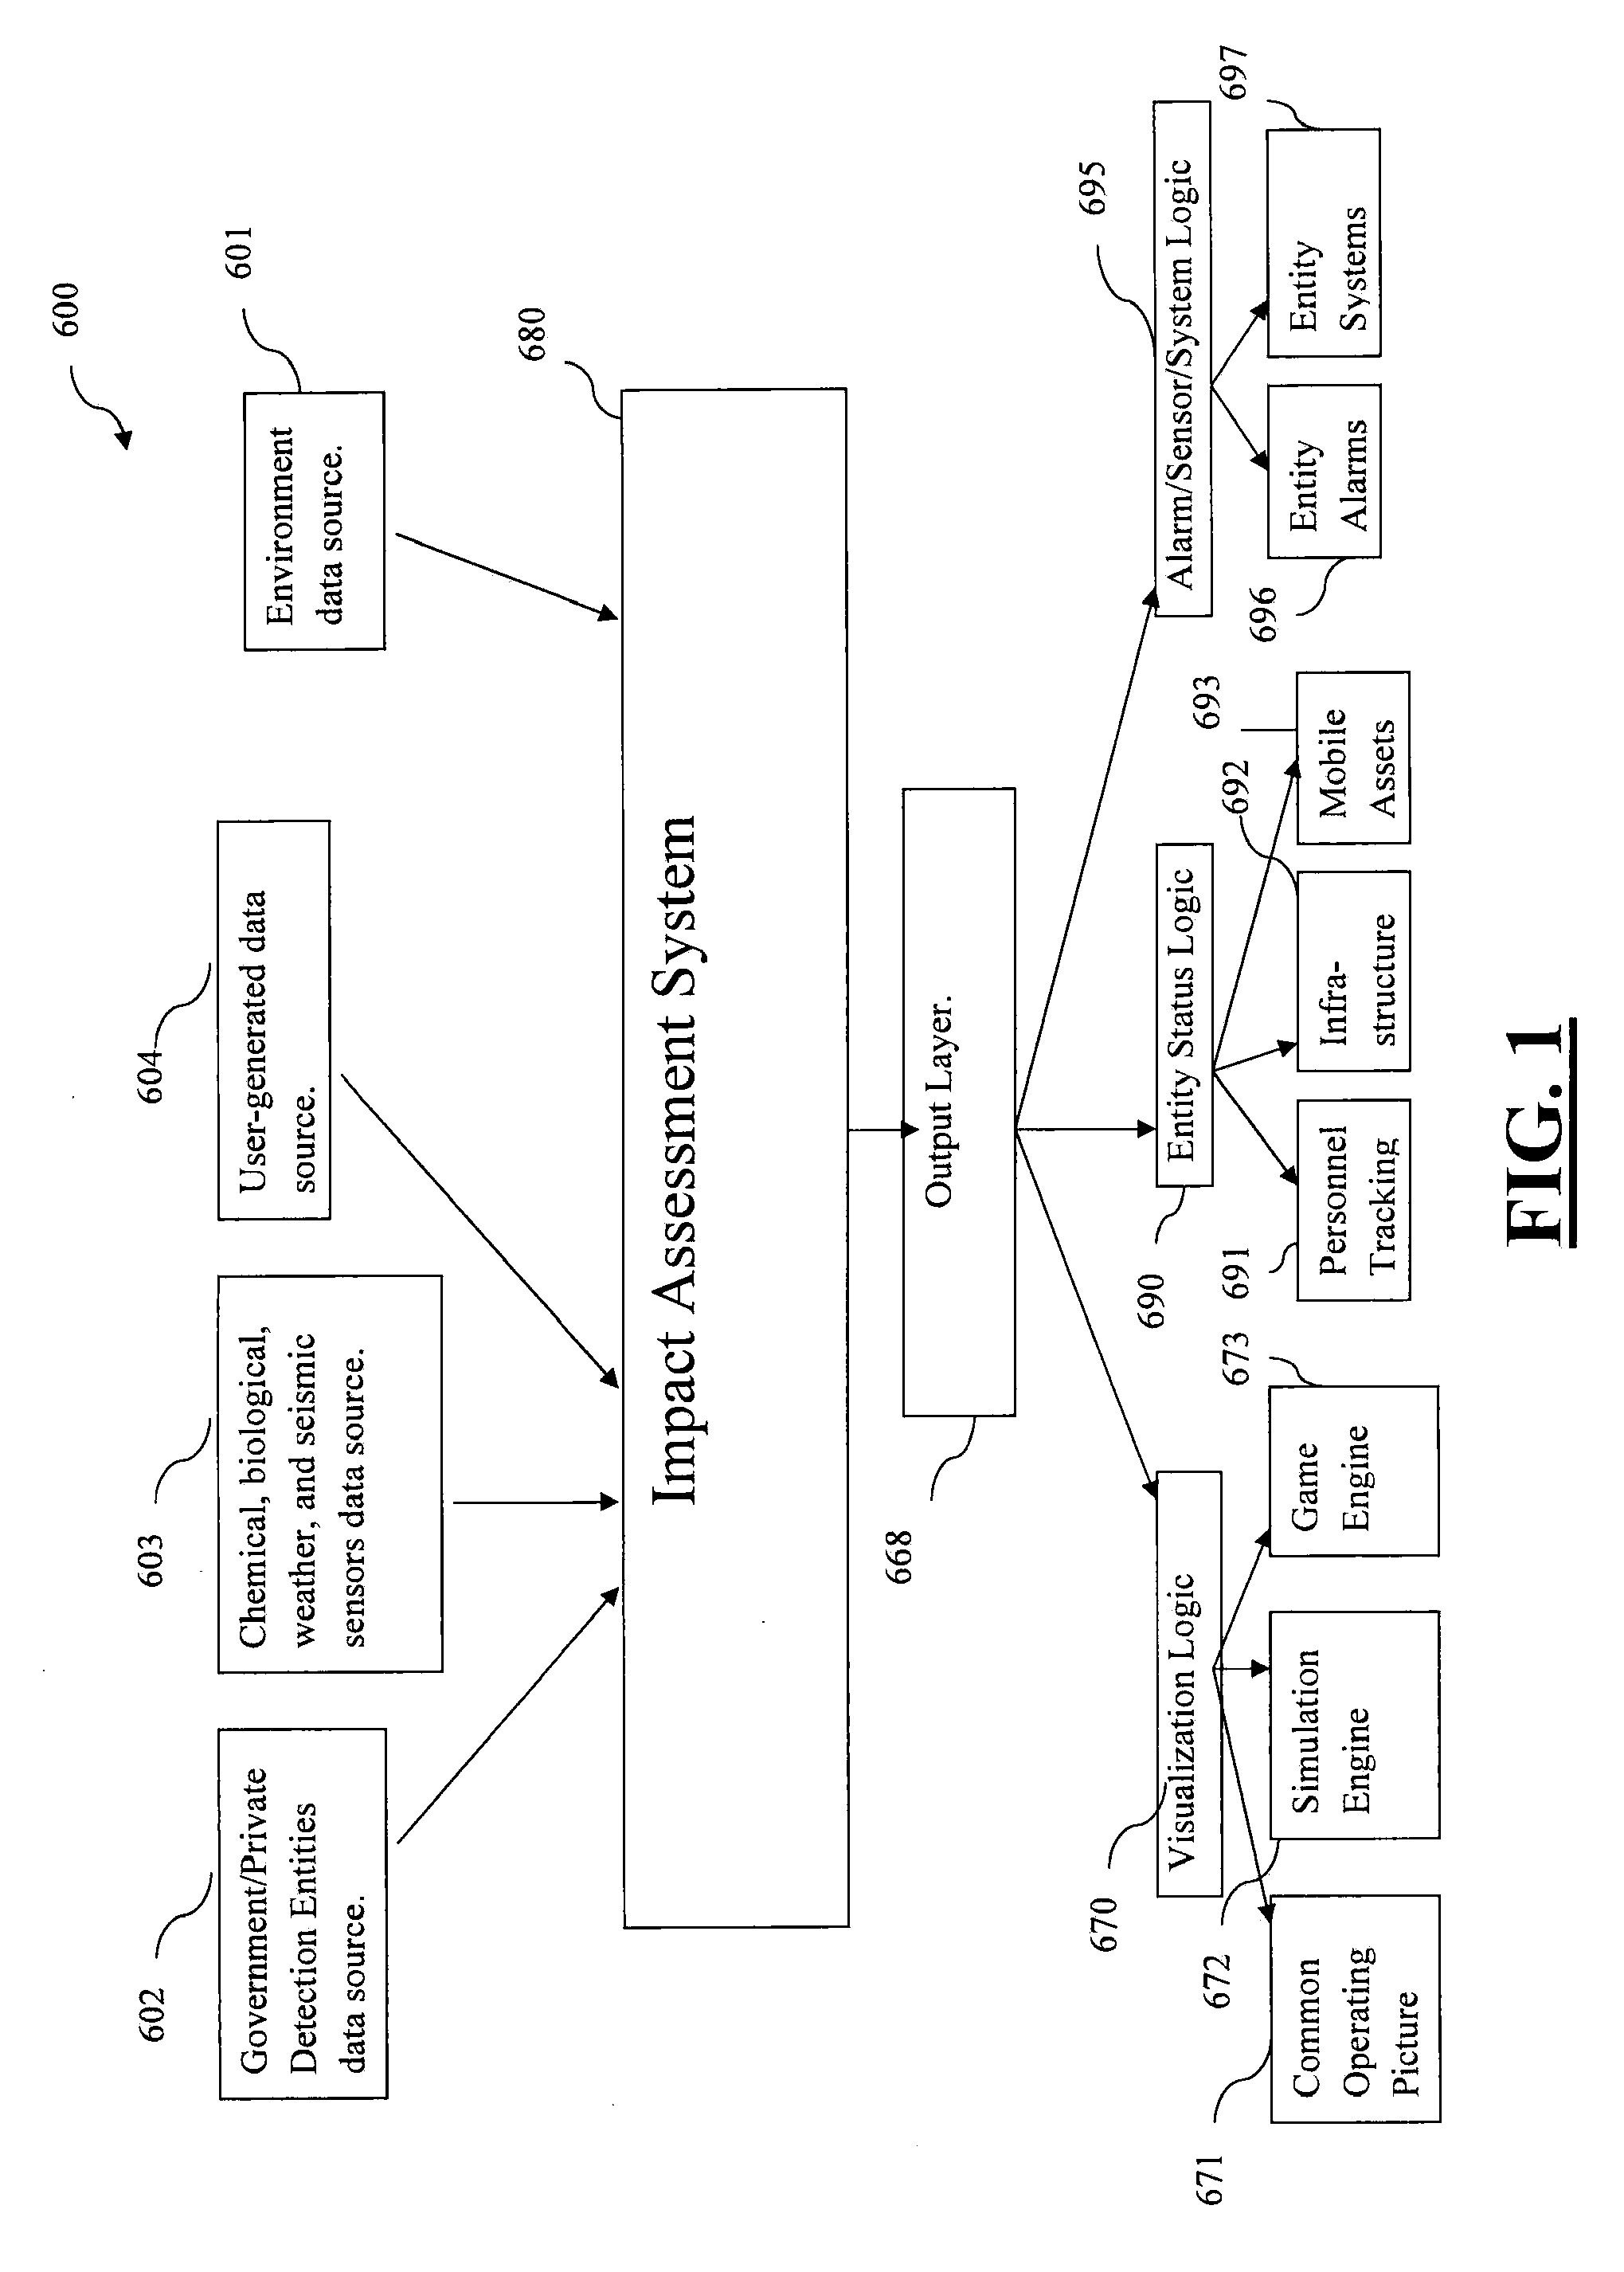 Method, apparatus, and system for rapid assessment